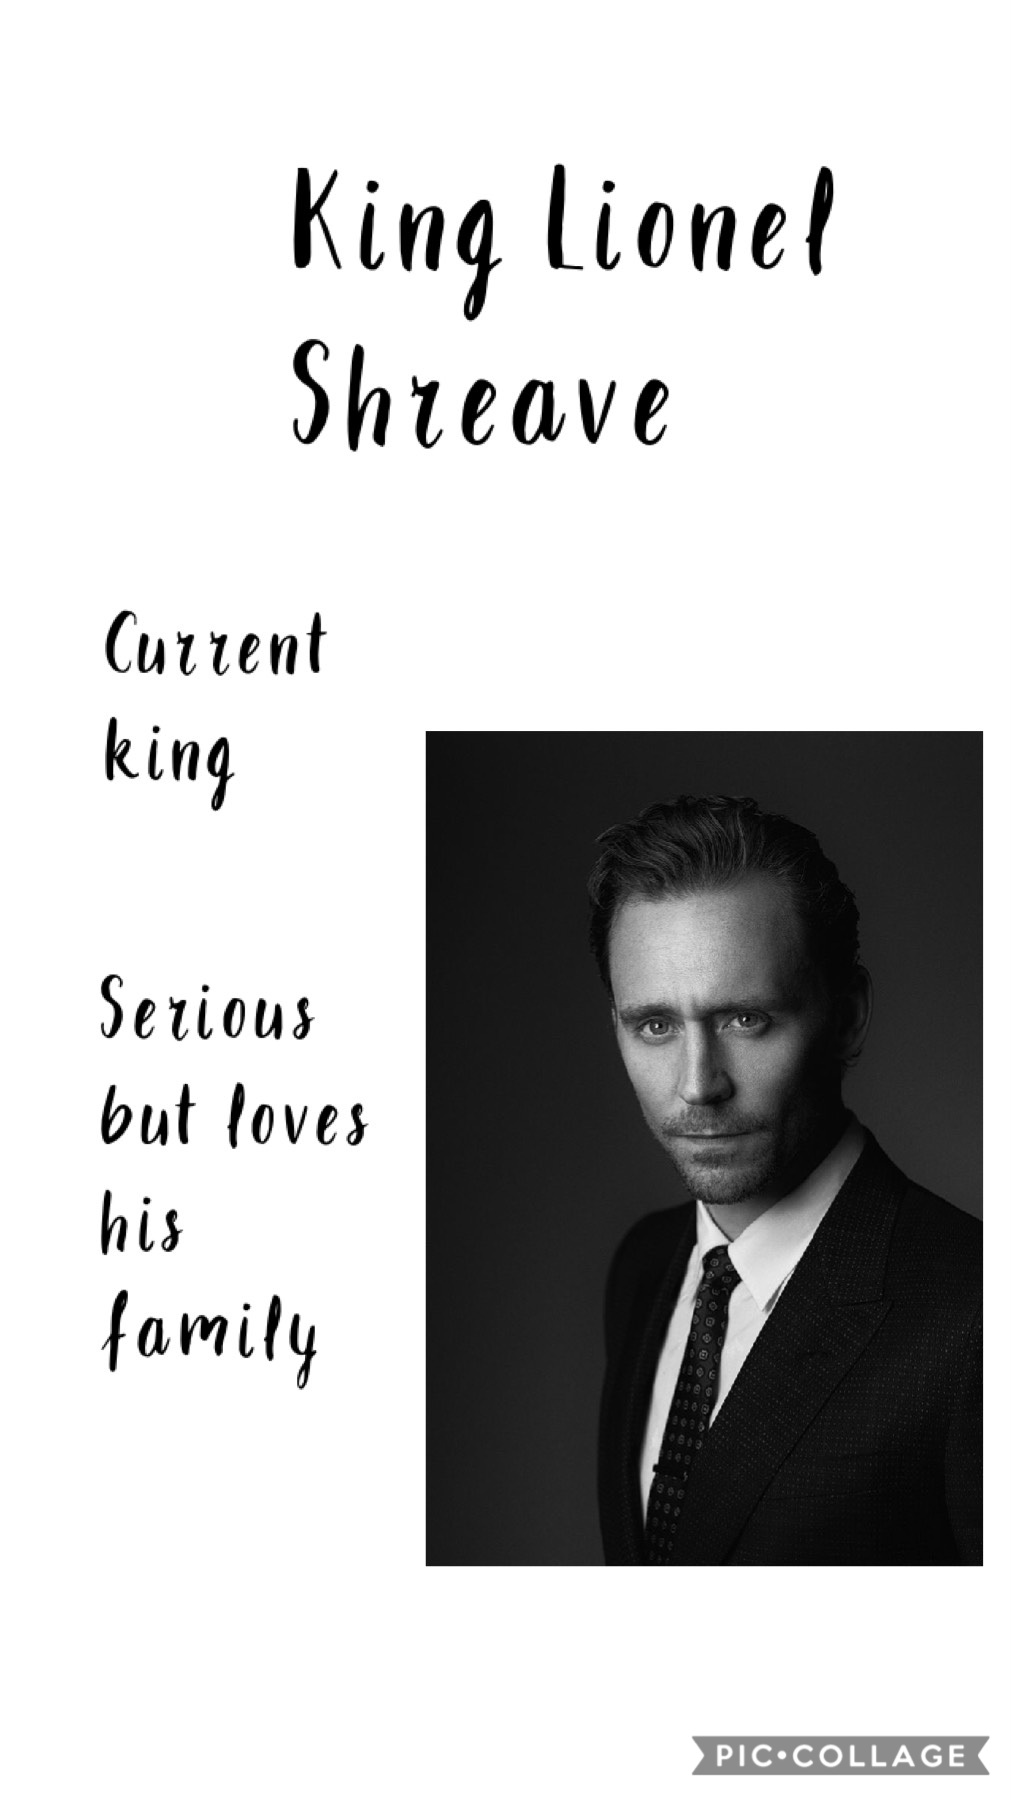 Introducing king Lionel schreave 